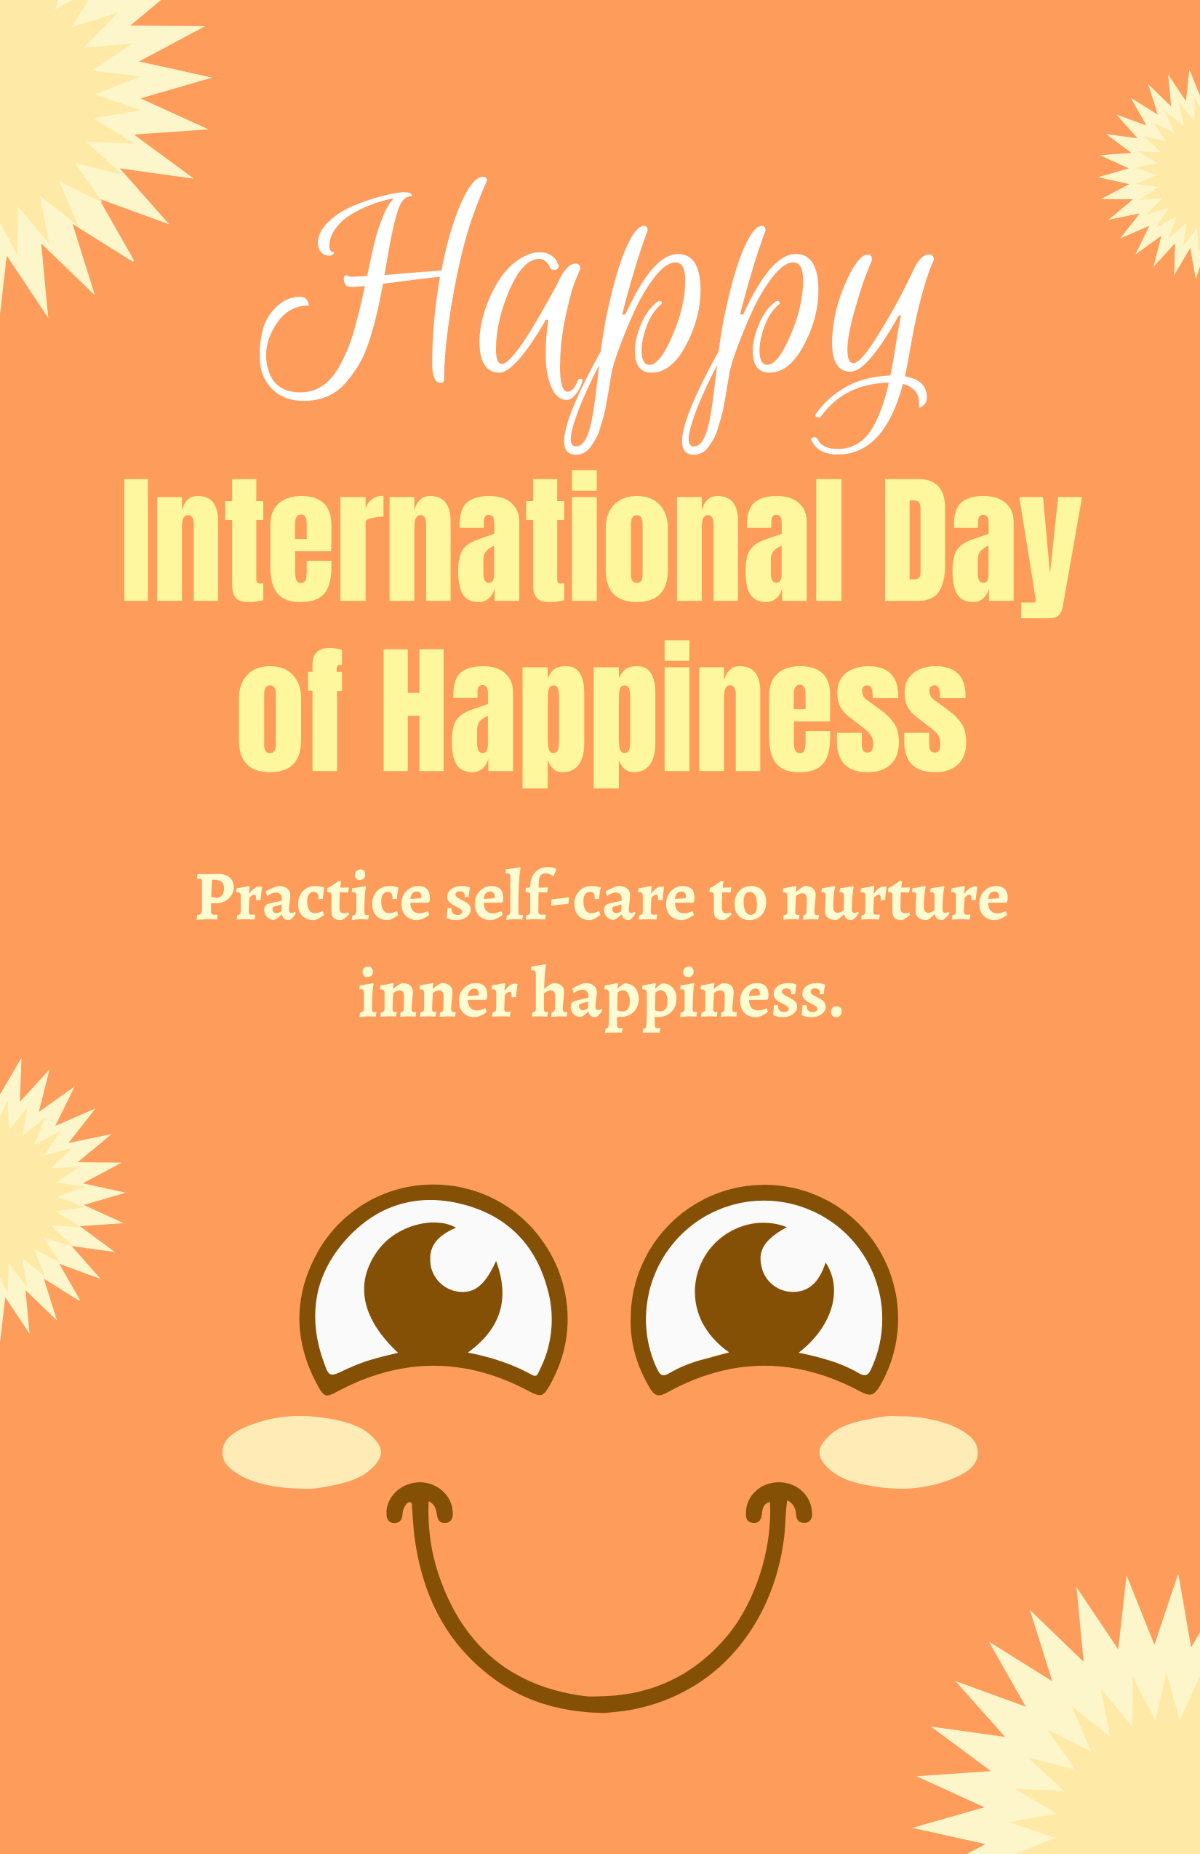 Free International Day of Happiness Poster Template